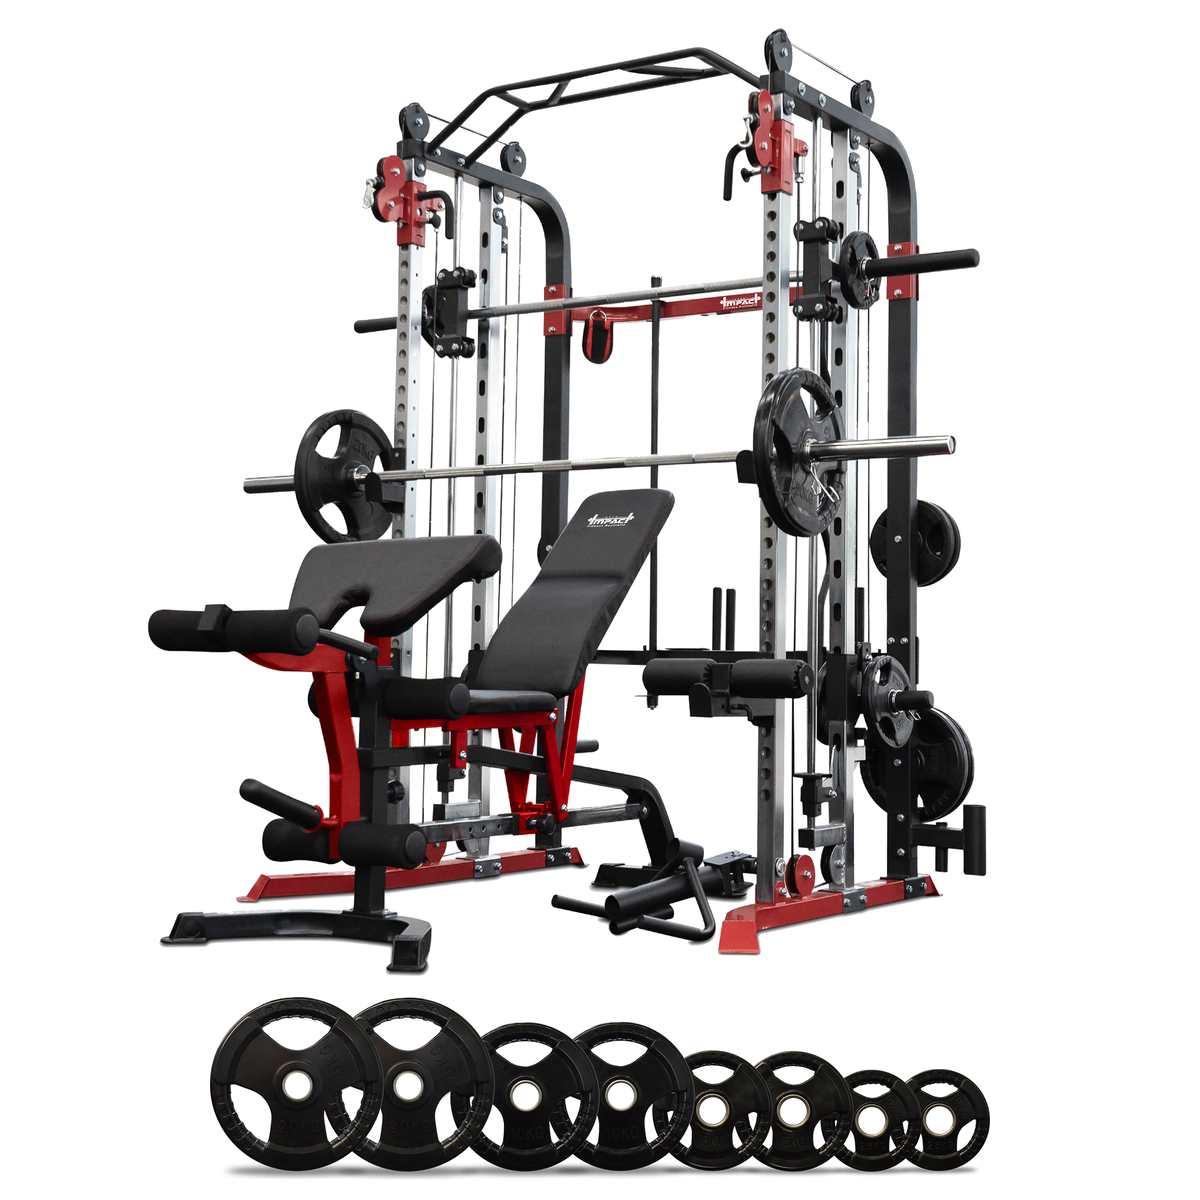 Impact Fitness MF5 Multi Trainer + Adjustable Bench + 100kg Olympic Weight Plates + Olympic Barbell